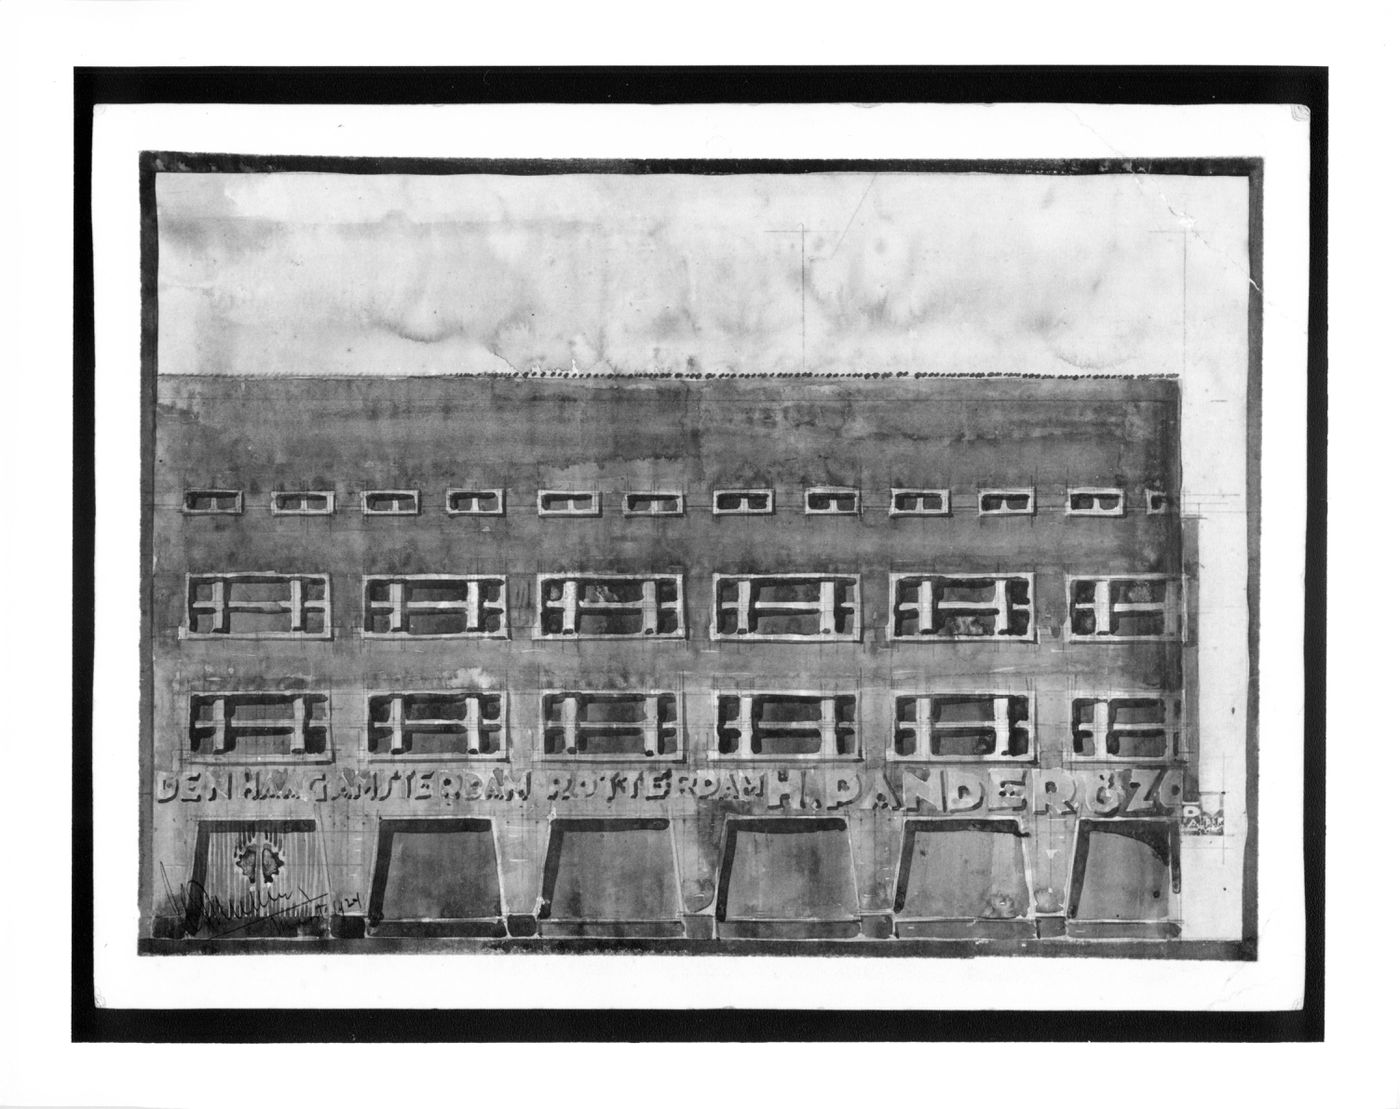 Competition drawing [?] showing an elevation for the H. Pander & Zonen Furniture Factory [?], Netherlands